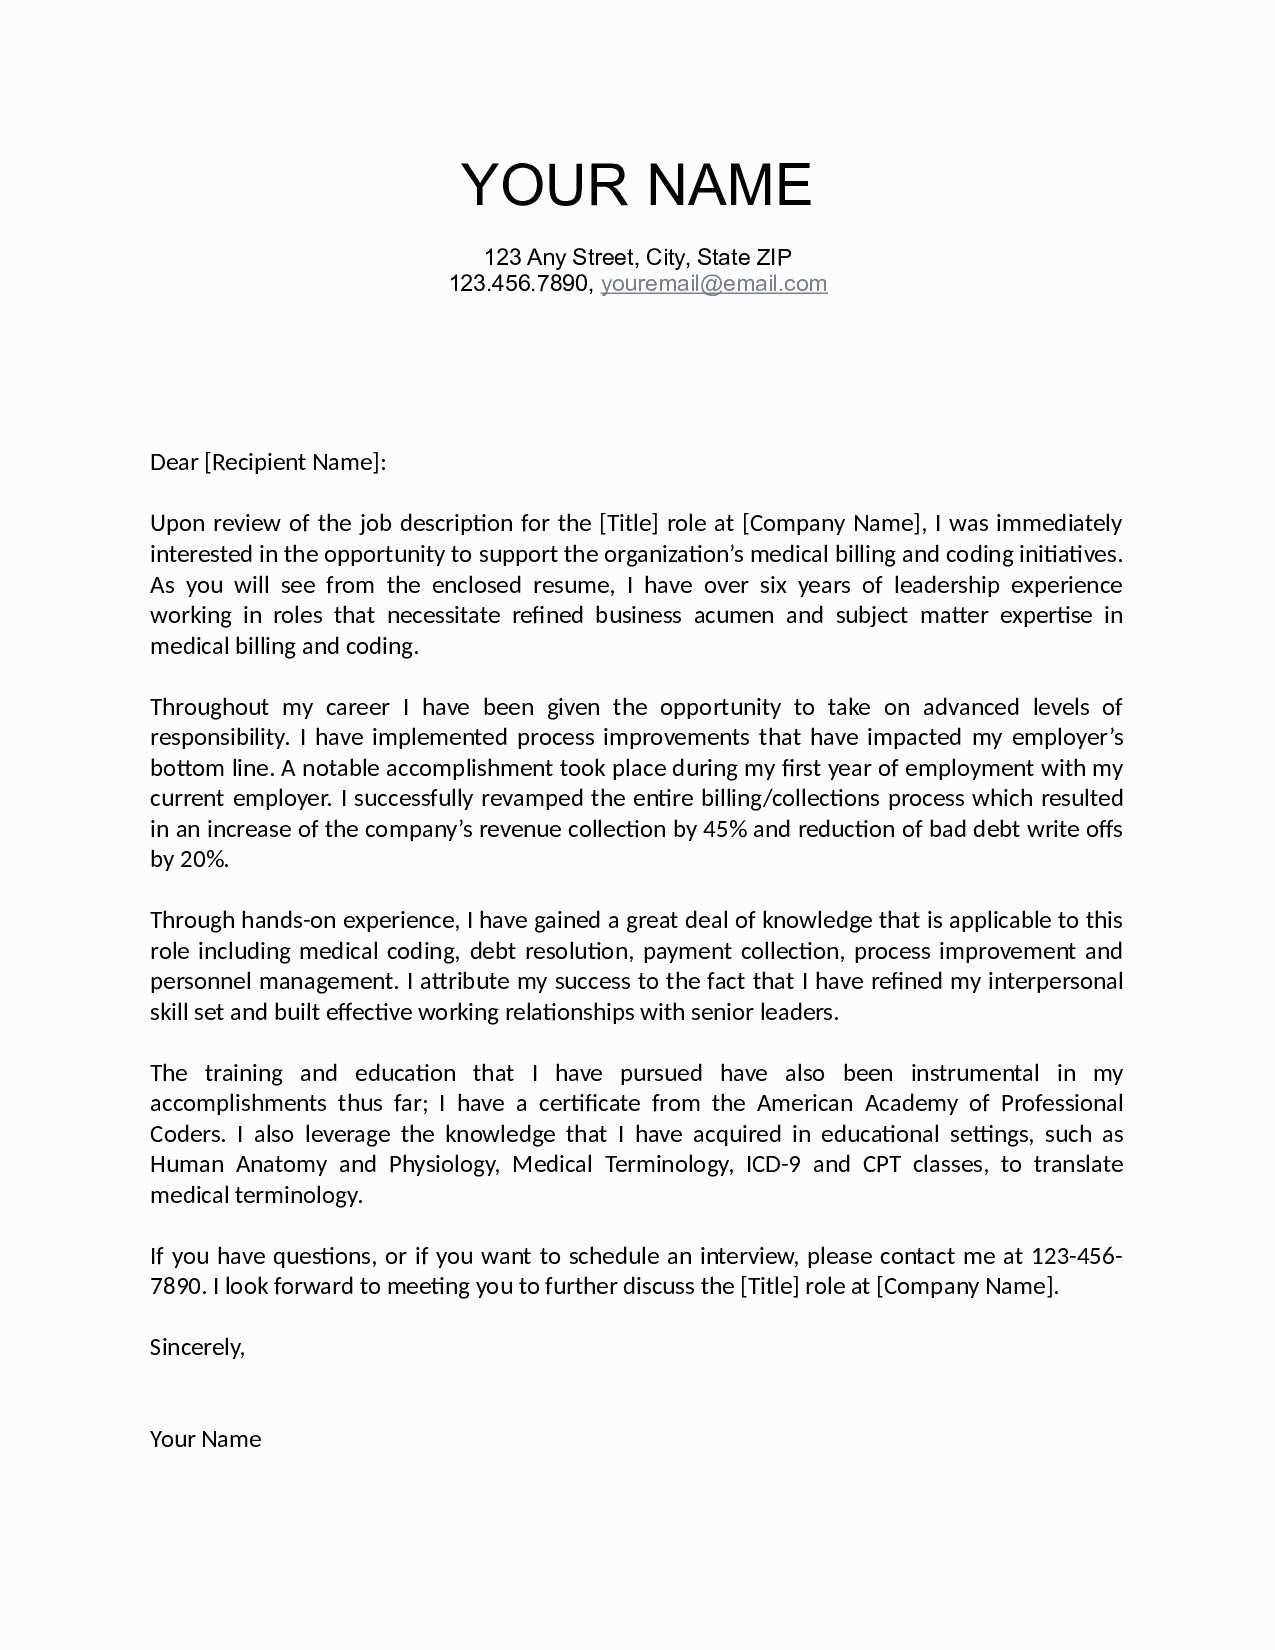 Successful Cover Letter Template - Covering Letter for Work Experience Best Job Fer Letter Template